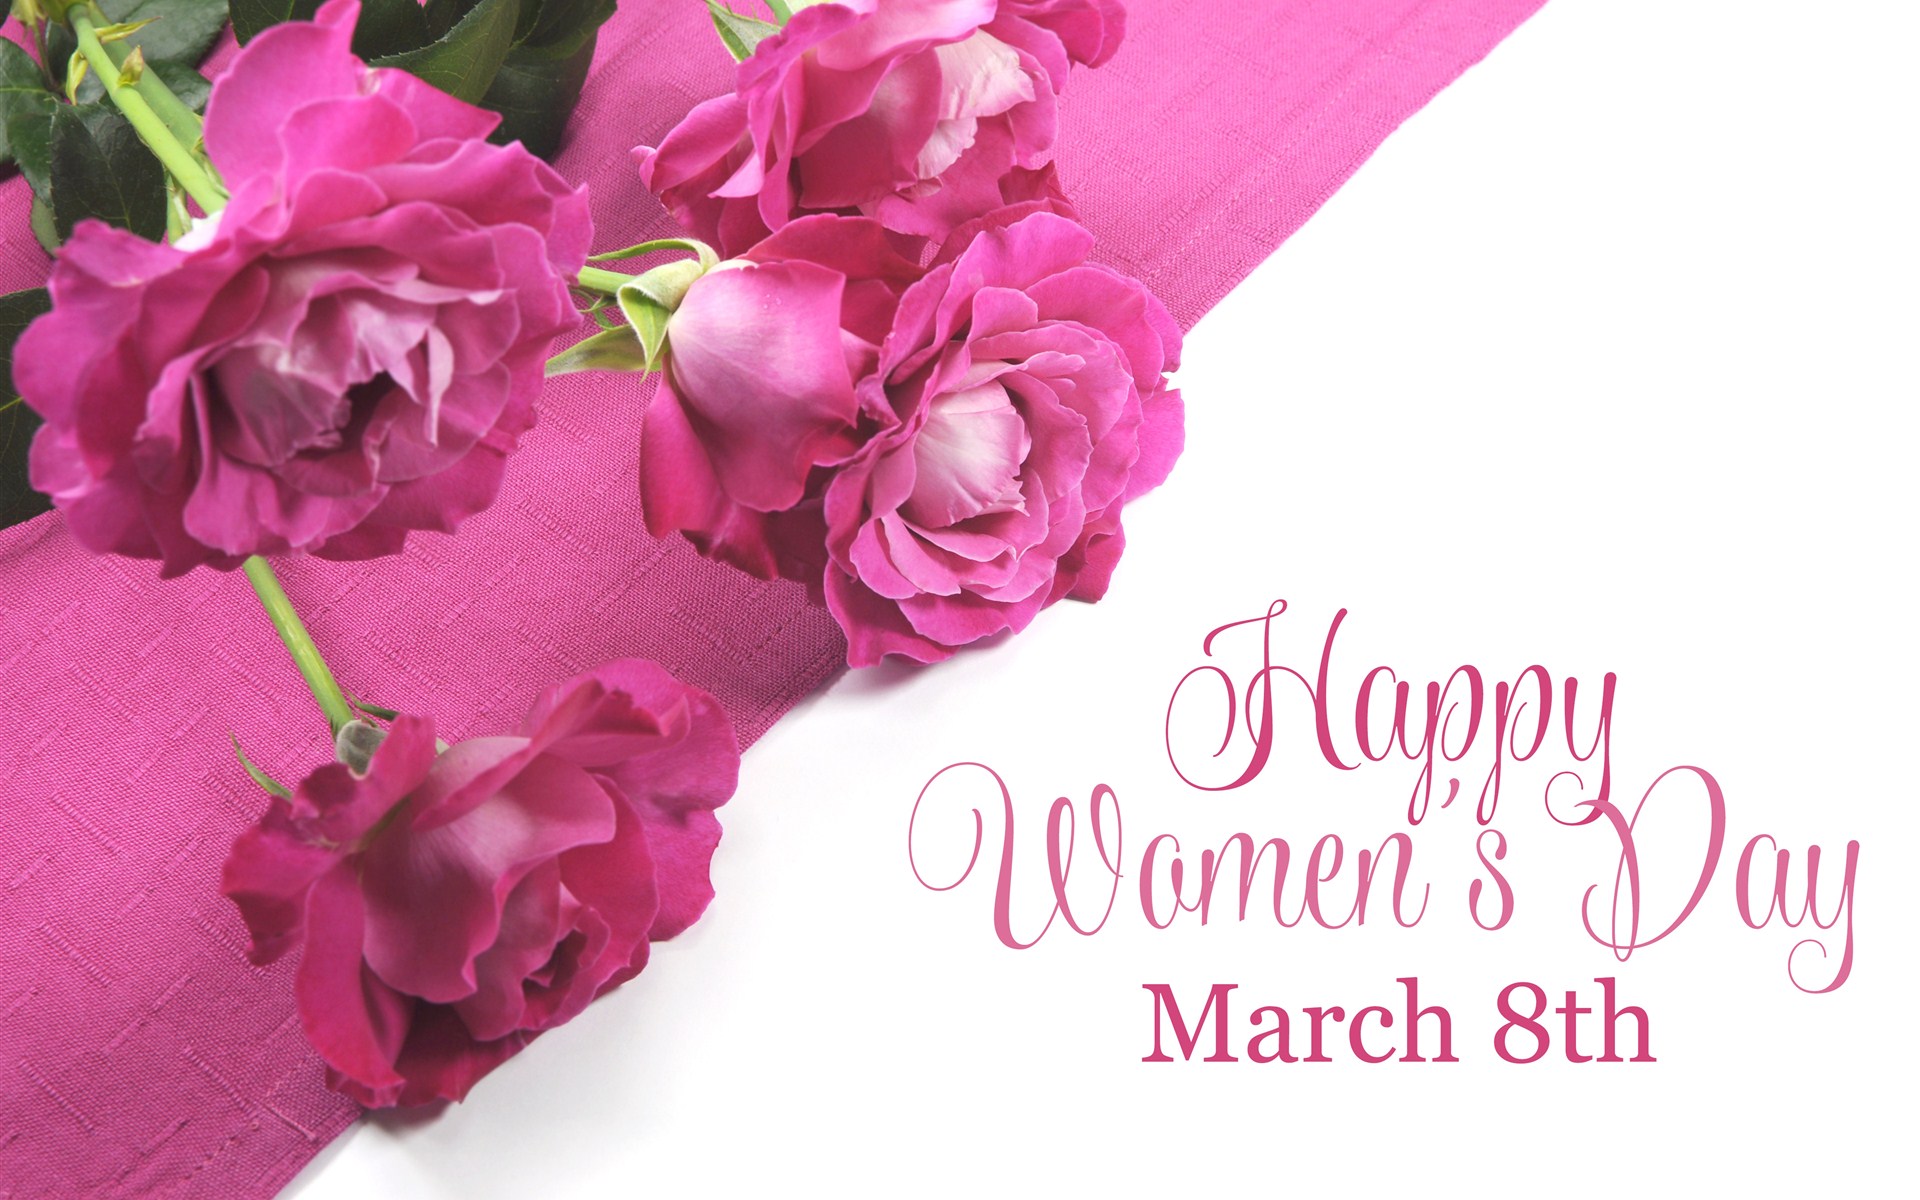 happy women's day, holiday, women's day, flower, pink rose, rose, statement